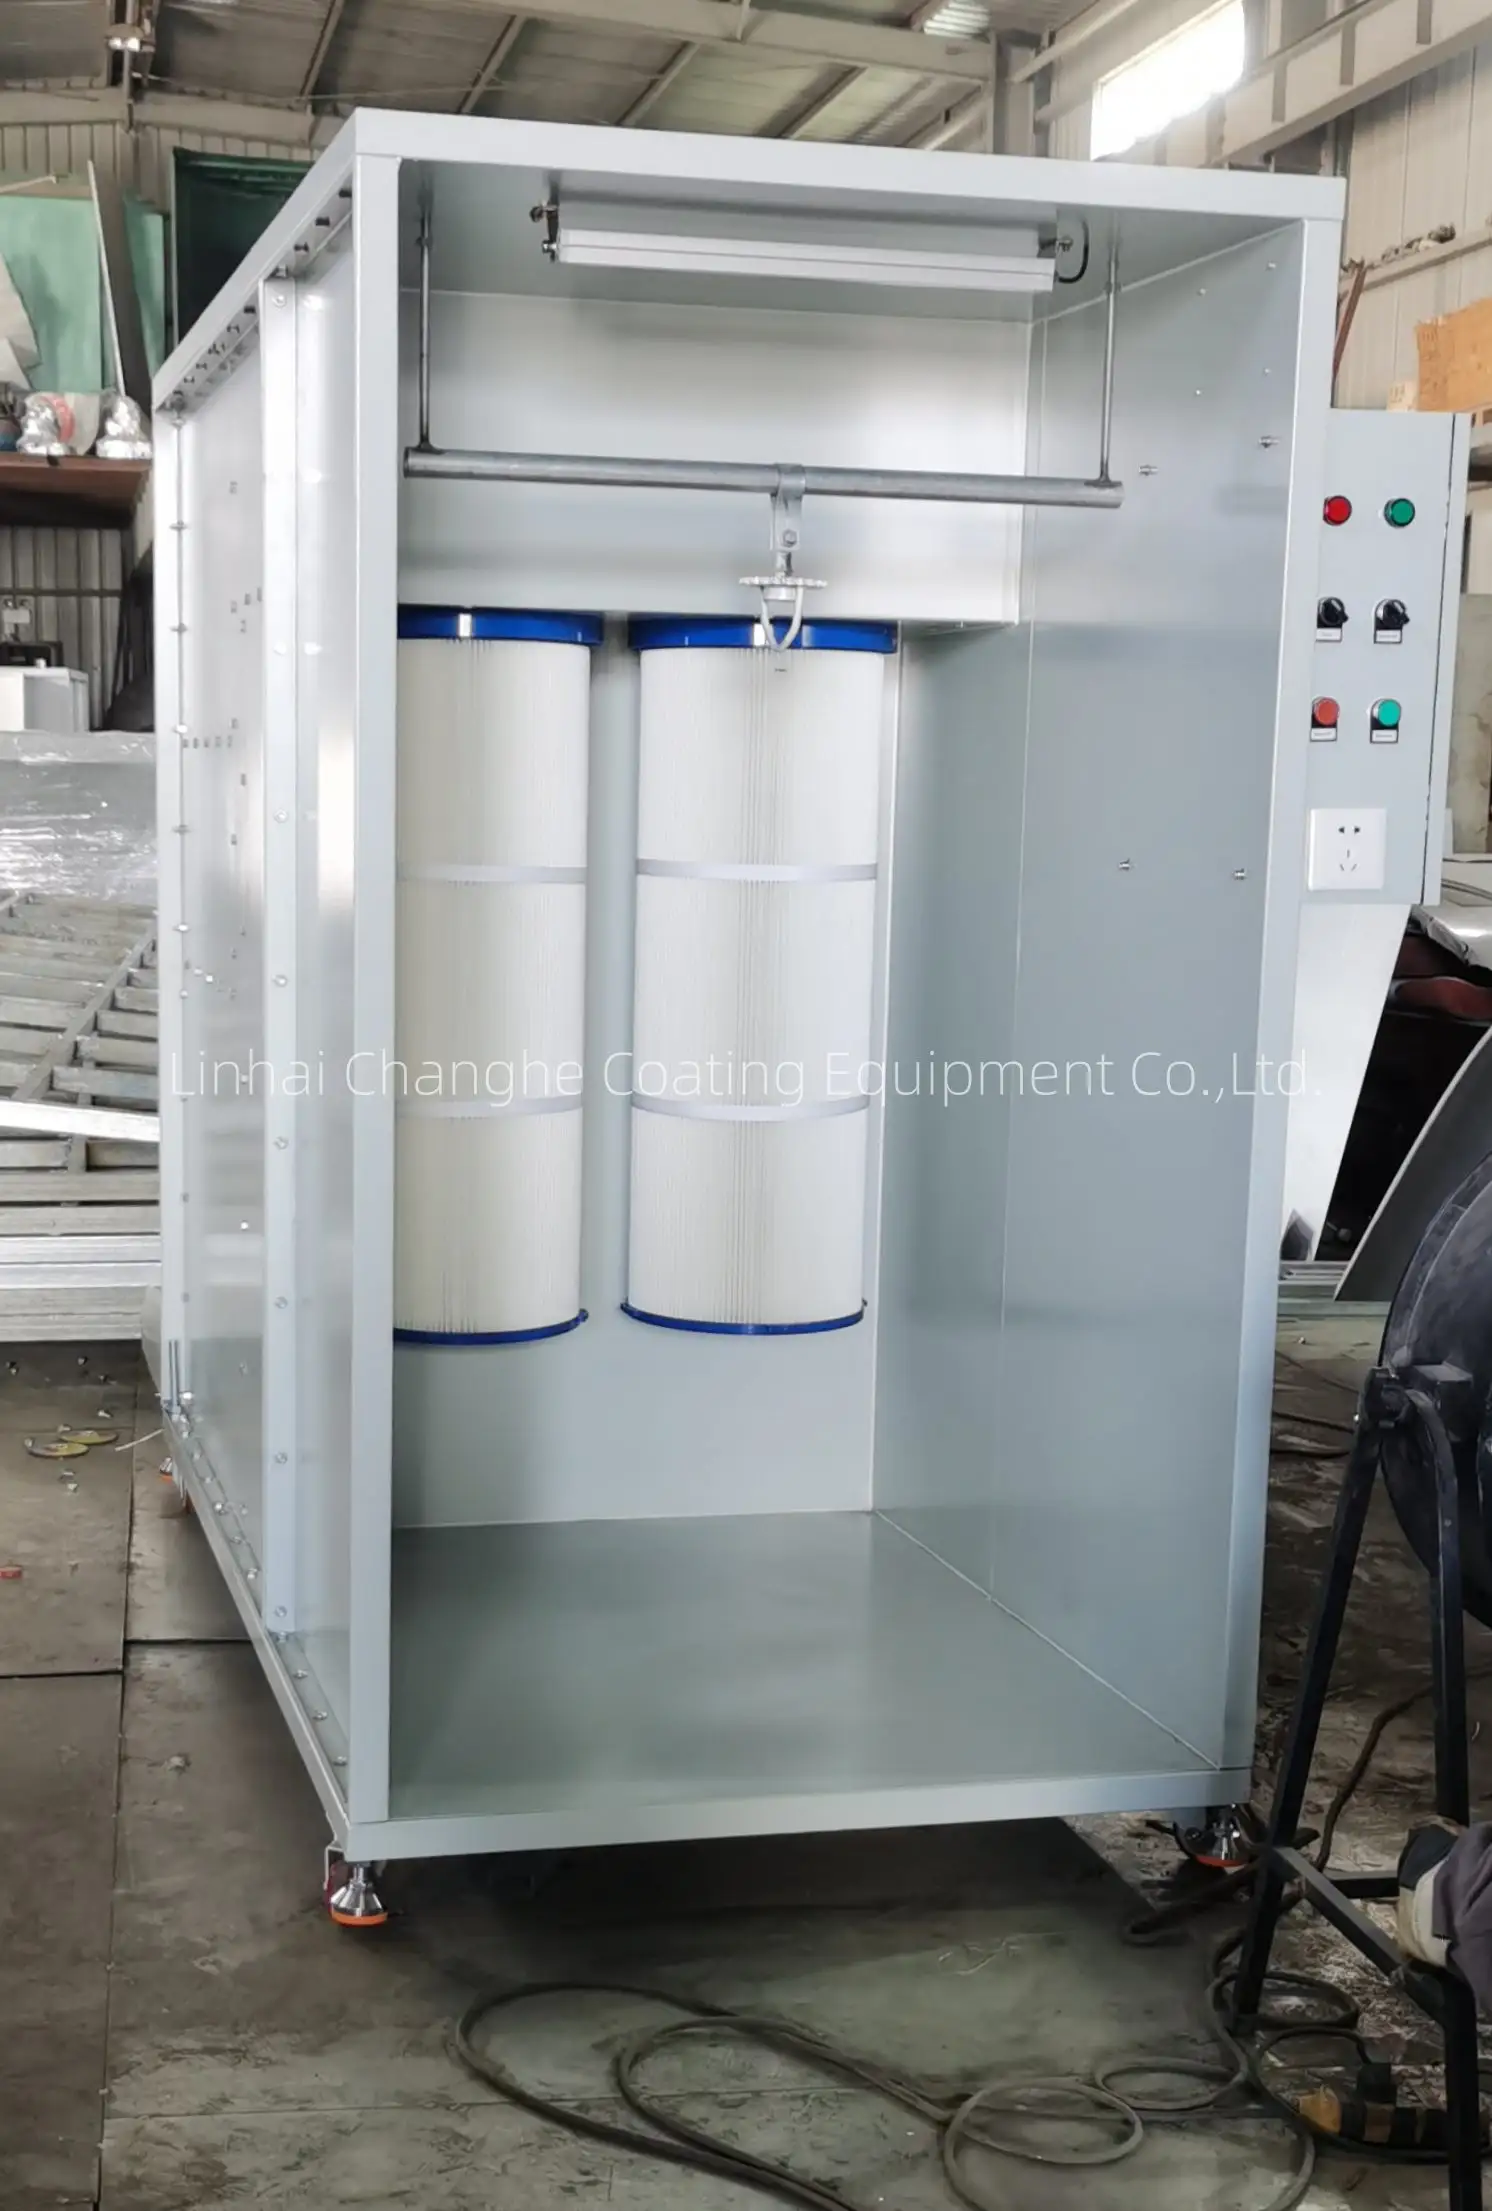 Changhe Portable Secondary Filtration Spray Paint Booth Manual Electrostatic Powder Coating Booth Environmental Powder Recovery